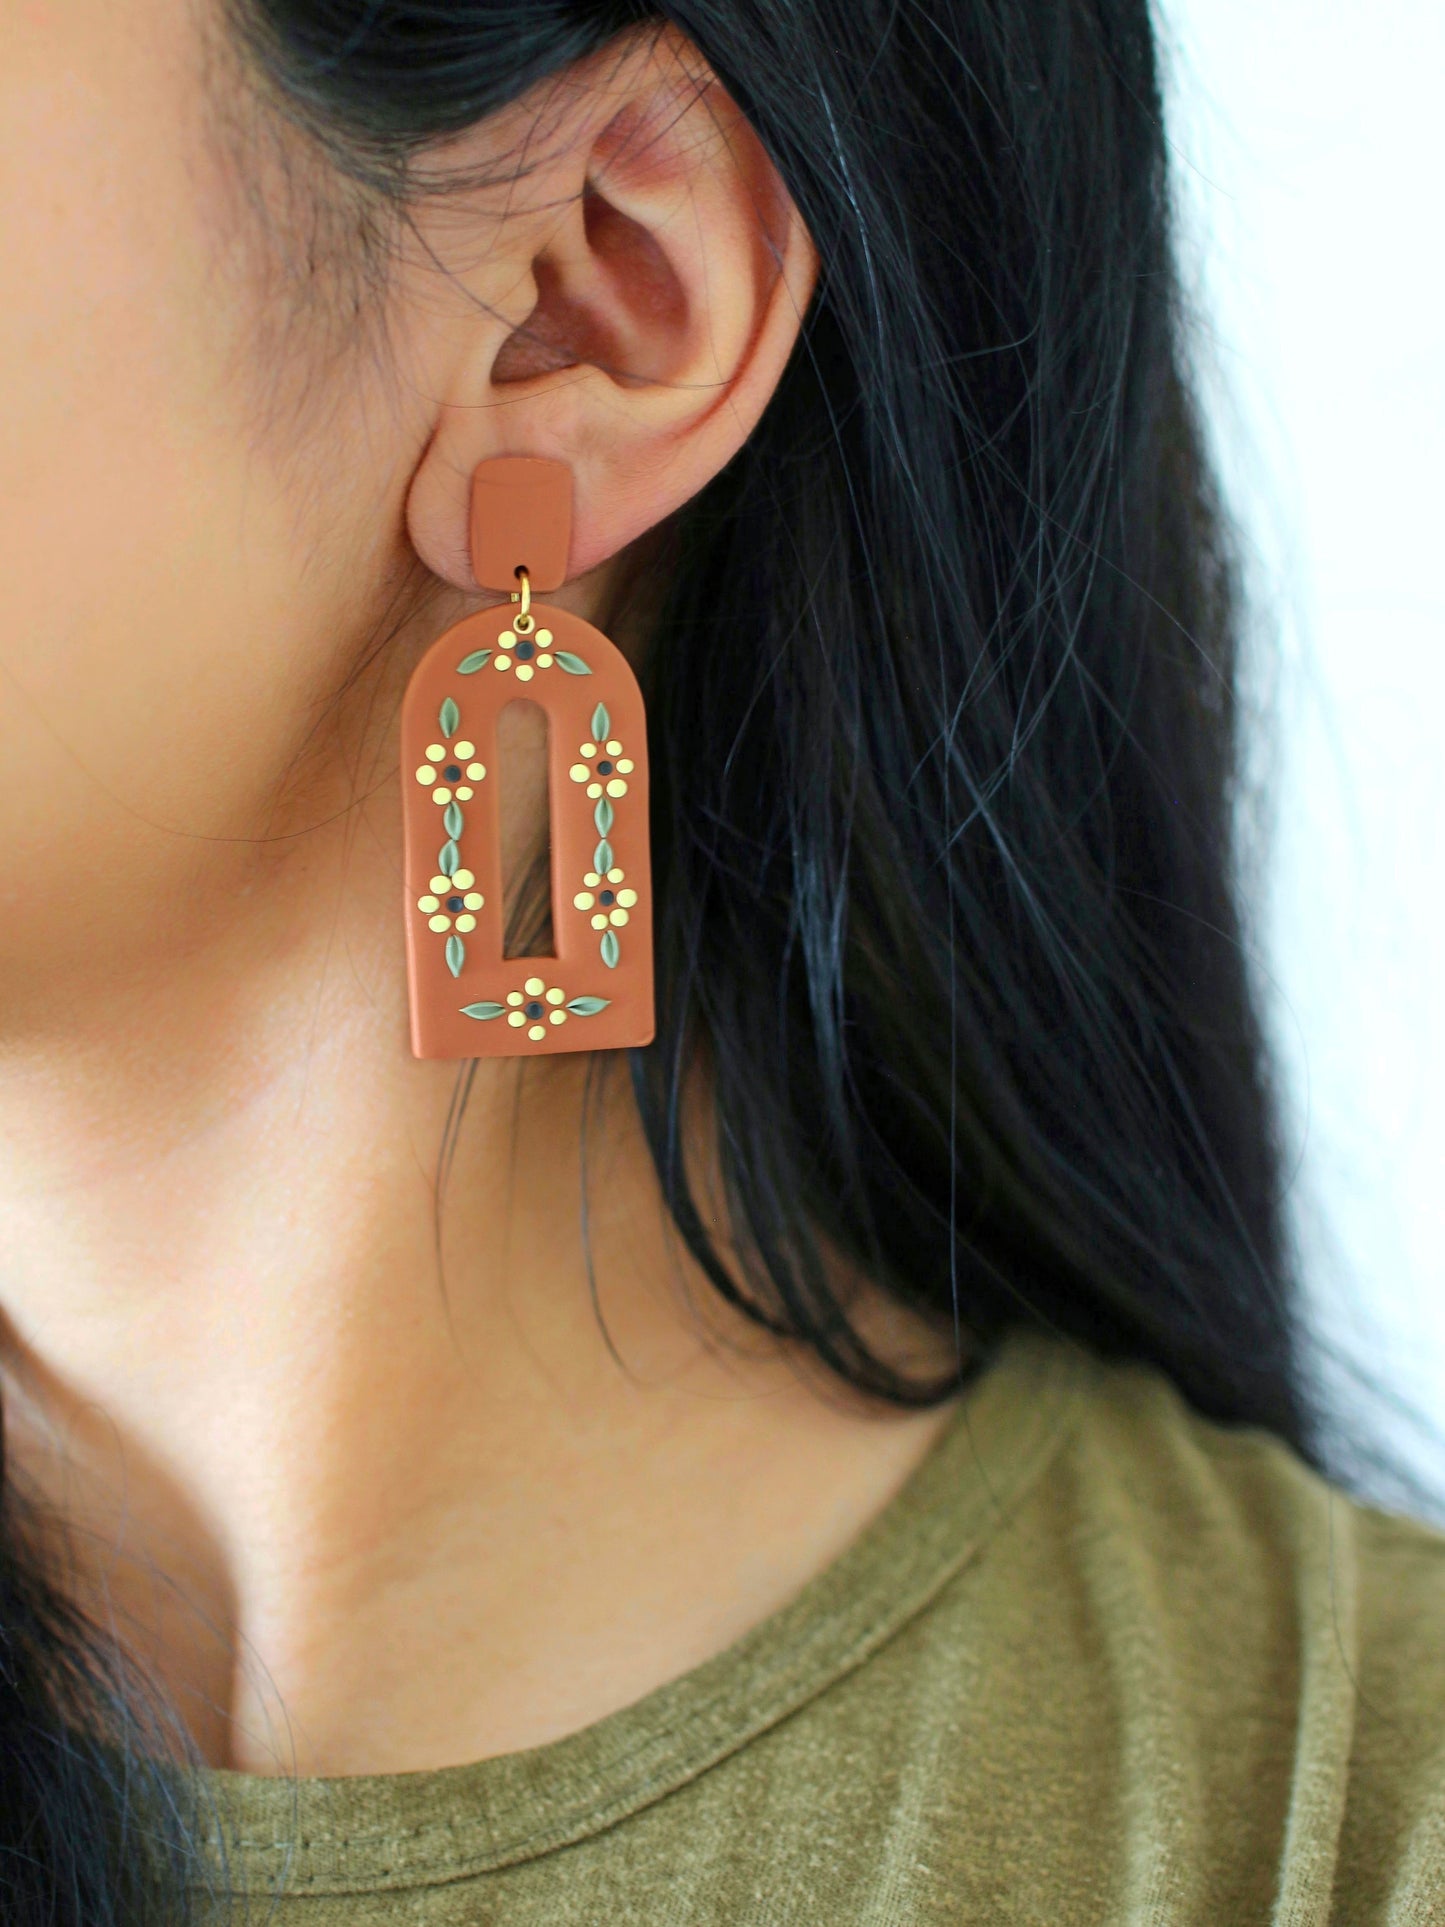 Buttercup Arches - Mexican Terracotta (Barro) inspired Earrings